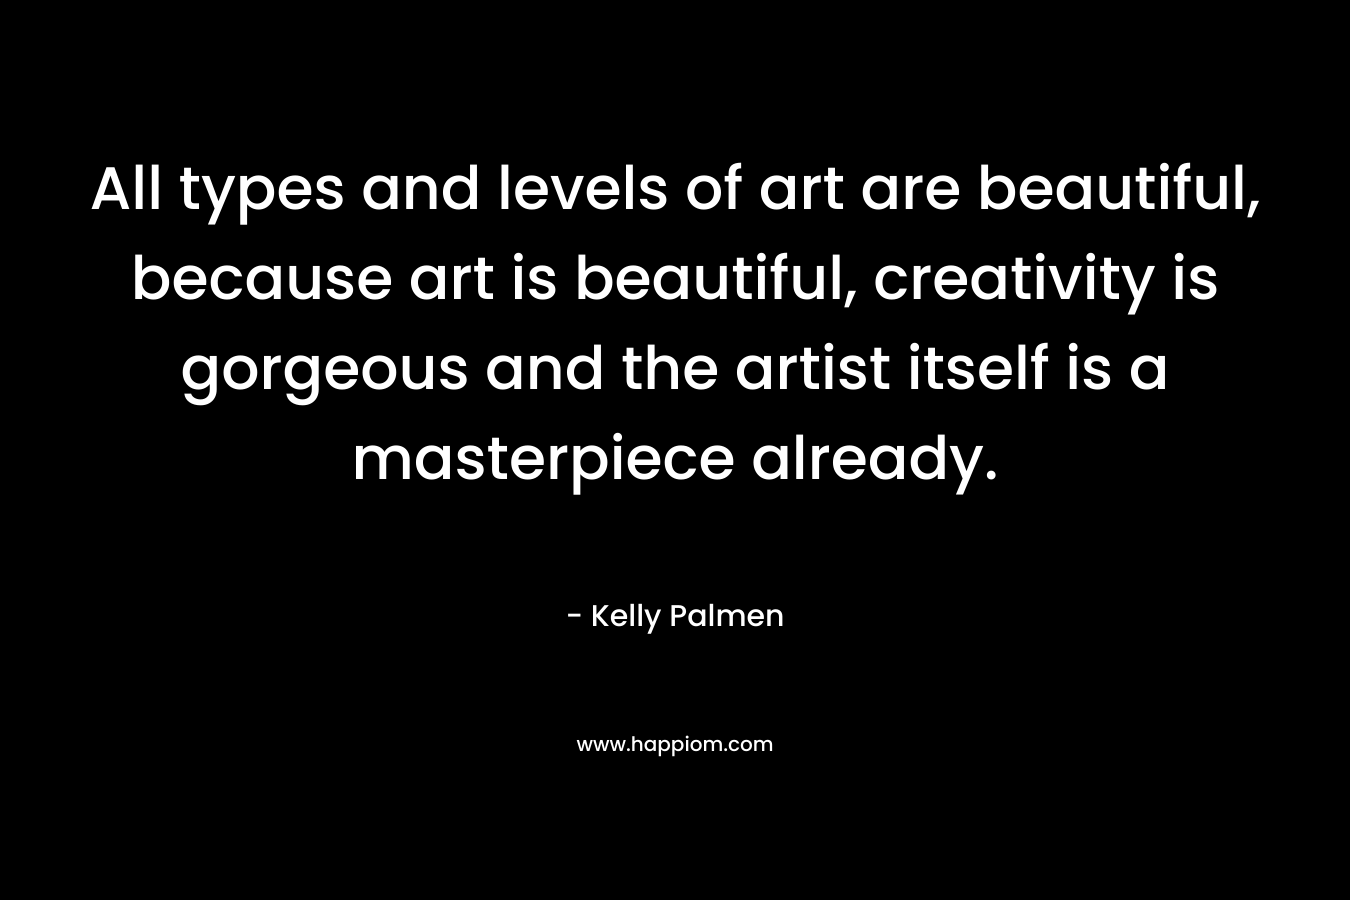 All types and levels of art are beautiful, because art is beautiful, creativity is gorgeous and the artist itself is a masterpiece already. – Kelly Palmen